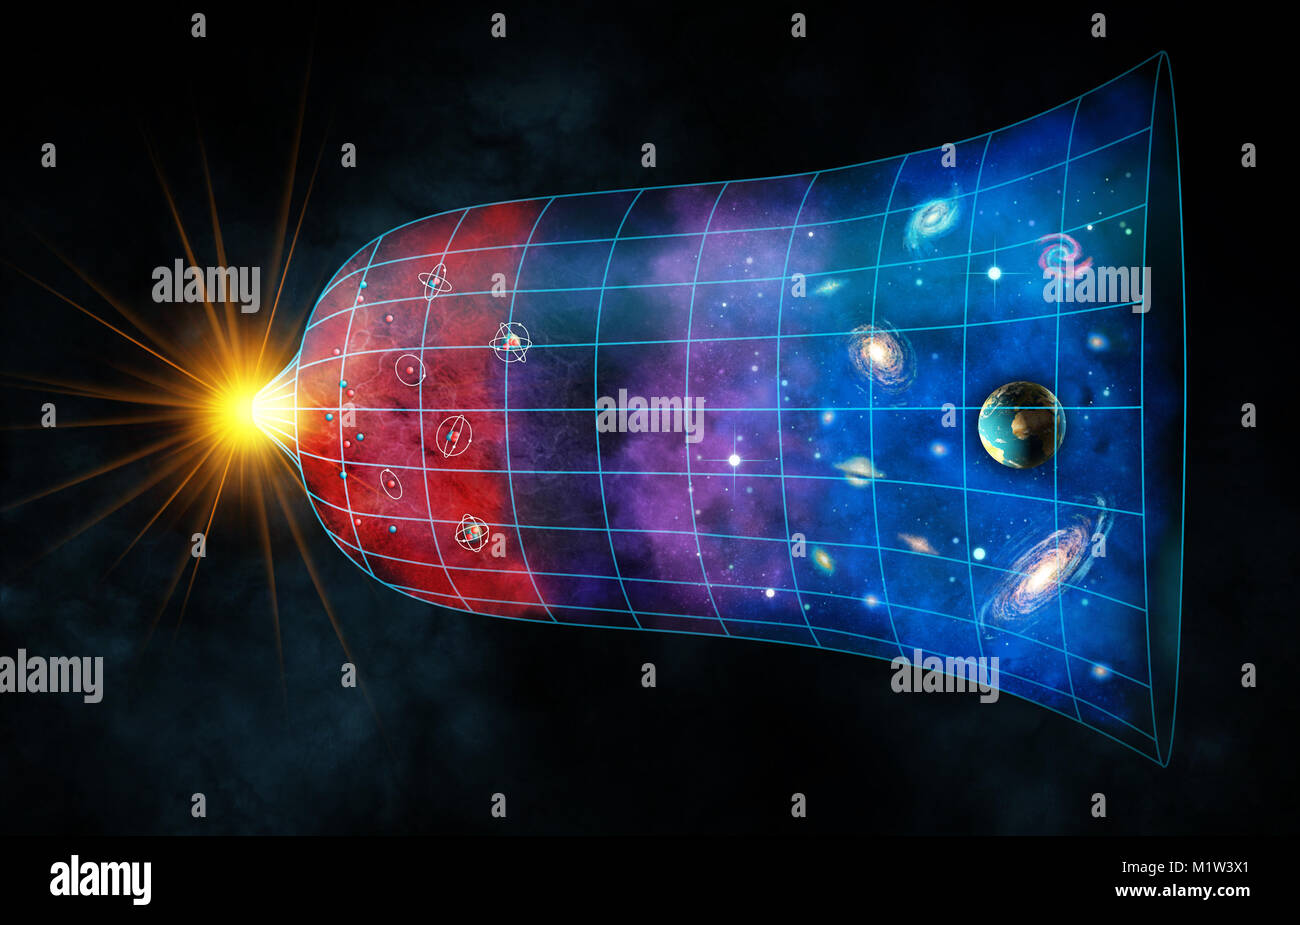 The expansion of the universe from the Big Bang to the present. Digital illustration. Stock Photo